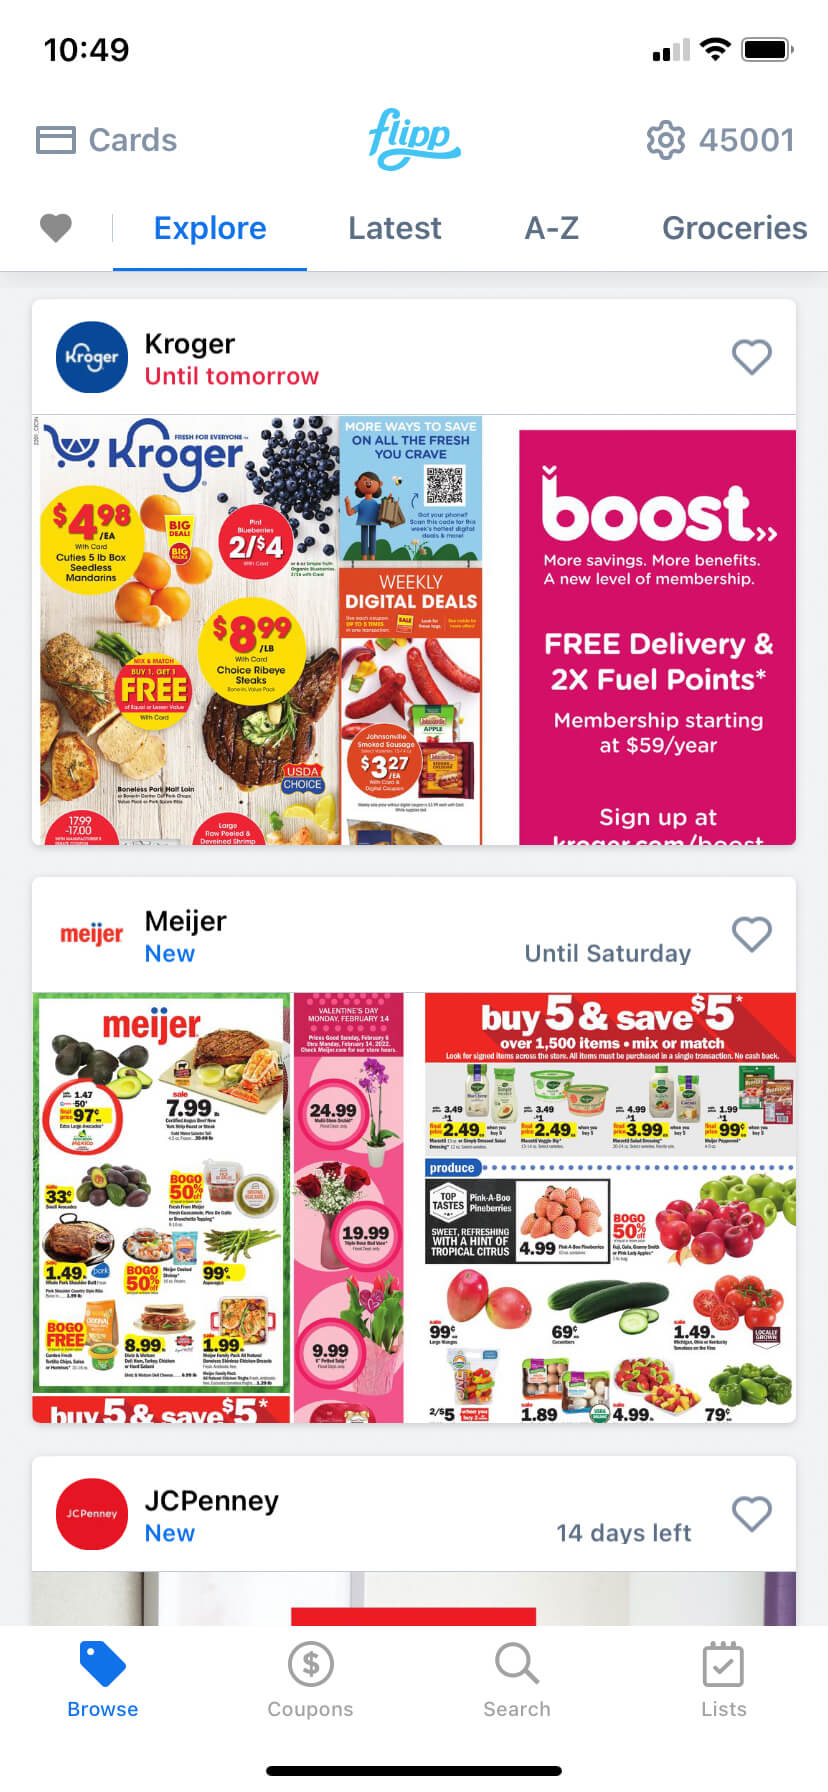 Flipp - Weekly Ad Circulars, Deals & Online Coupons - Download For Free.